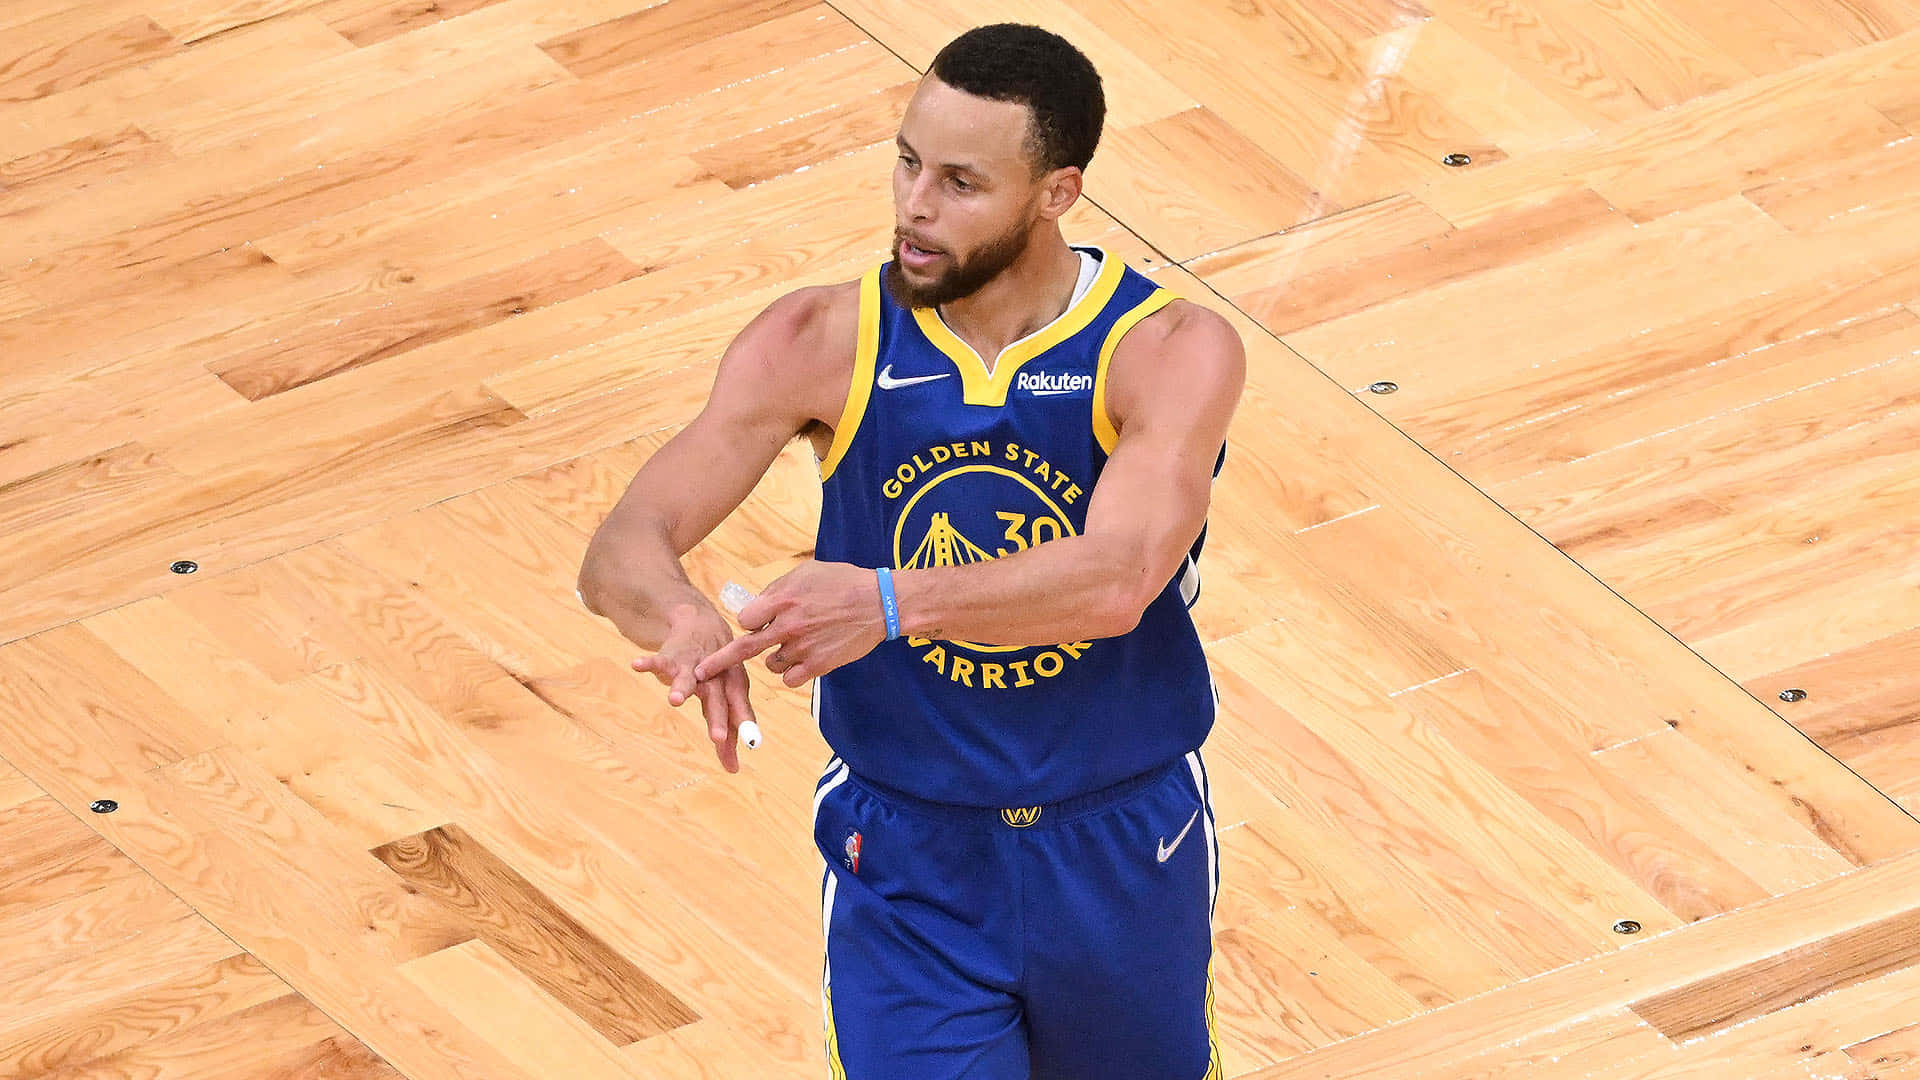 Golden State Warriors' Star Player, Stephen Curry, in action on the basketball court.